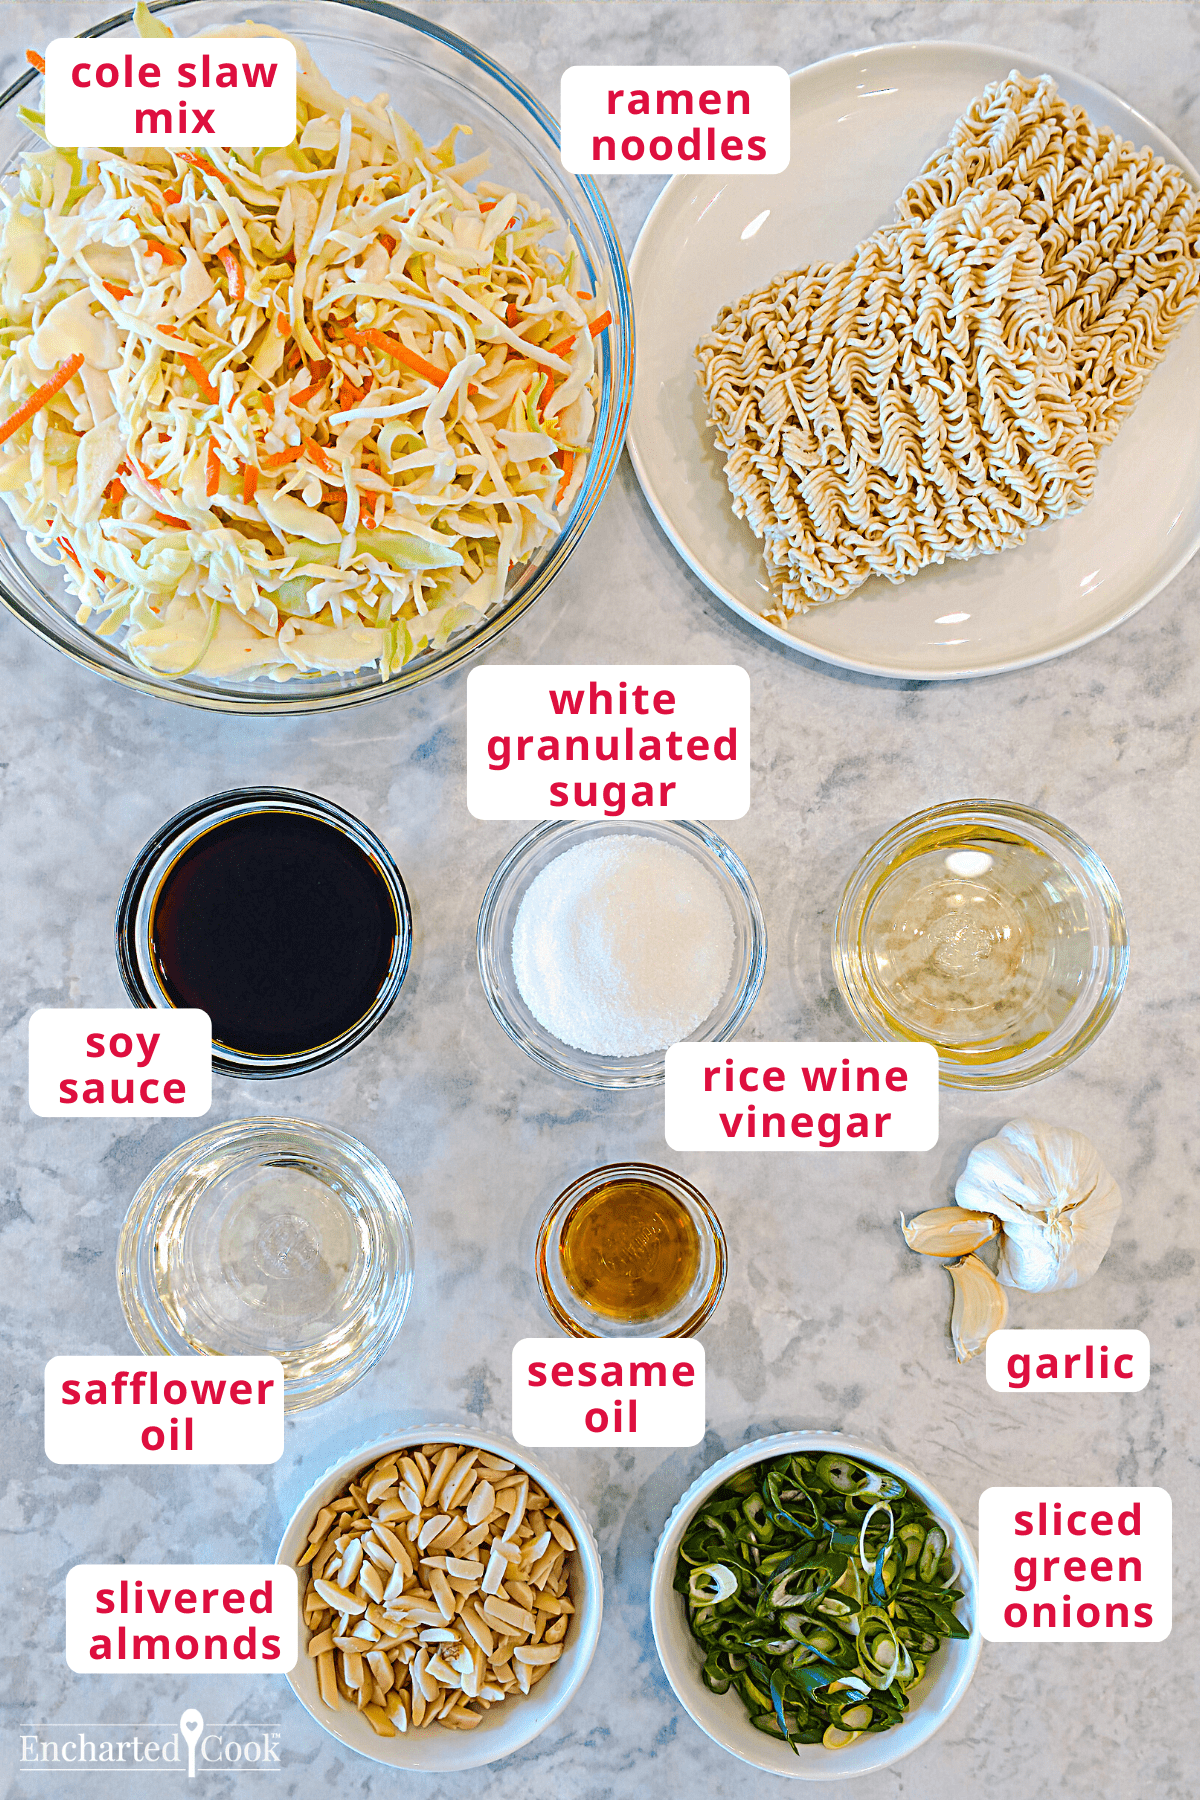 he salad ingredients, clockwise from top right: ramen noodles, white granulated sugar, rice wine vinegar, garlic, sliced green onions, sesame oil, slivered almonds, safflower oil, soy sauce, and cole slaw mix.